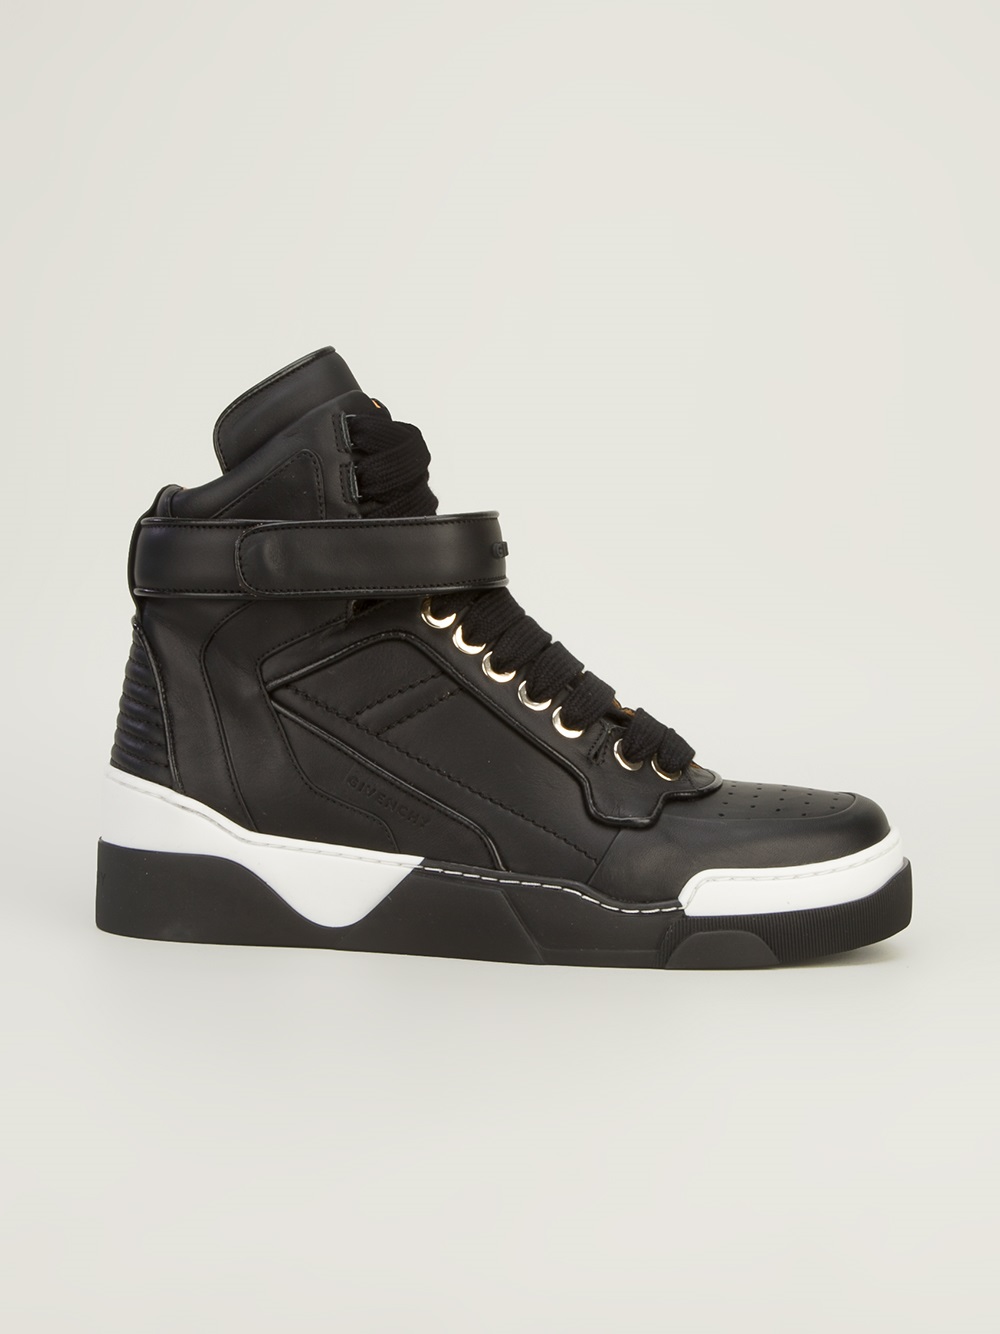 Lyst - Givenchy Hitop Trainer in Black for Men